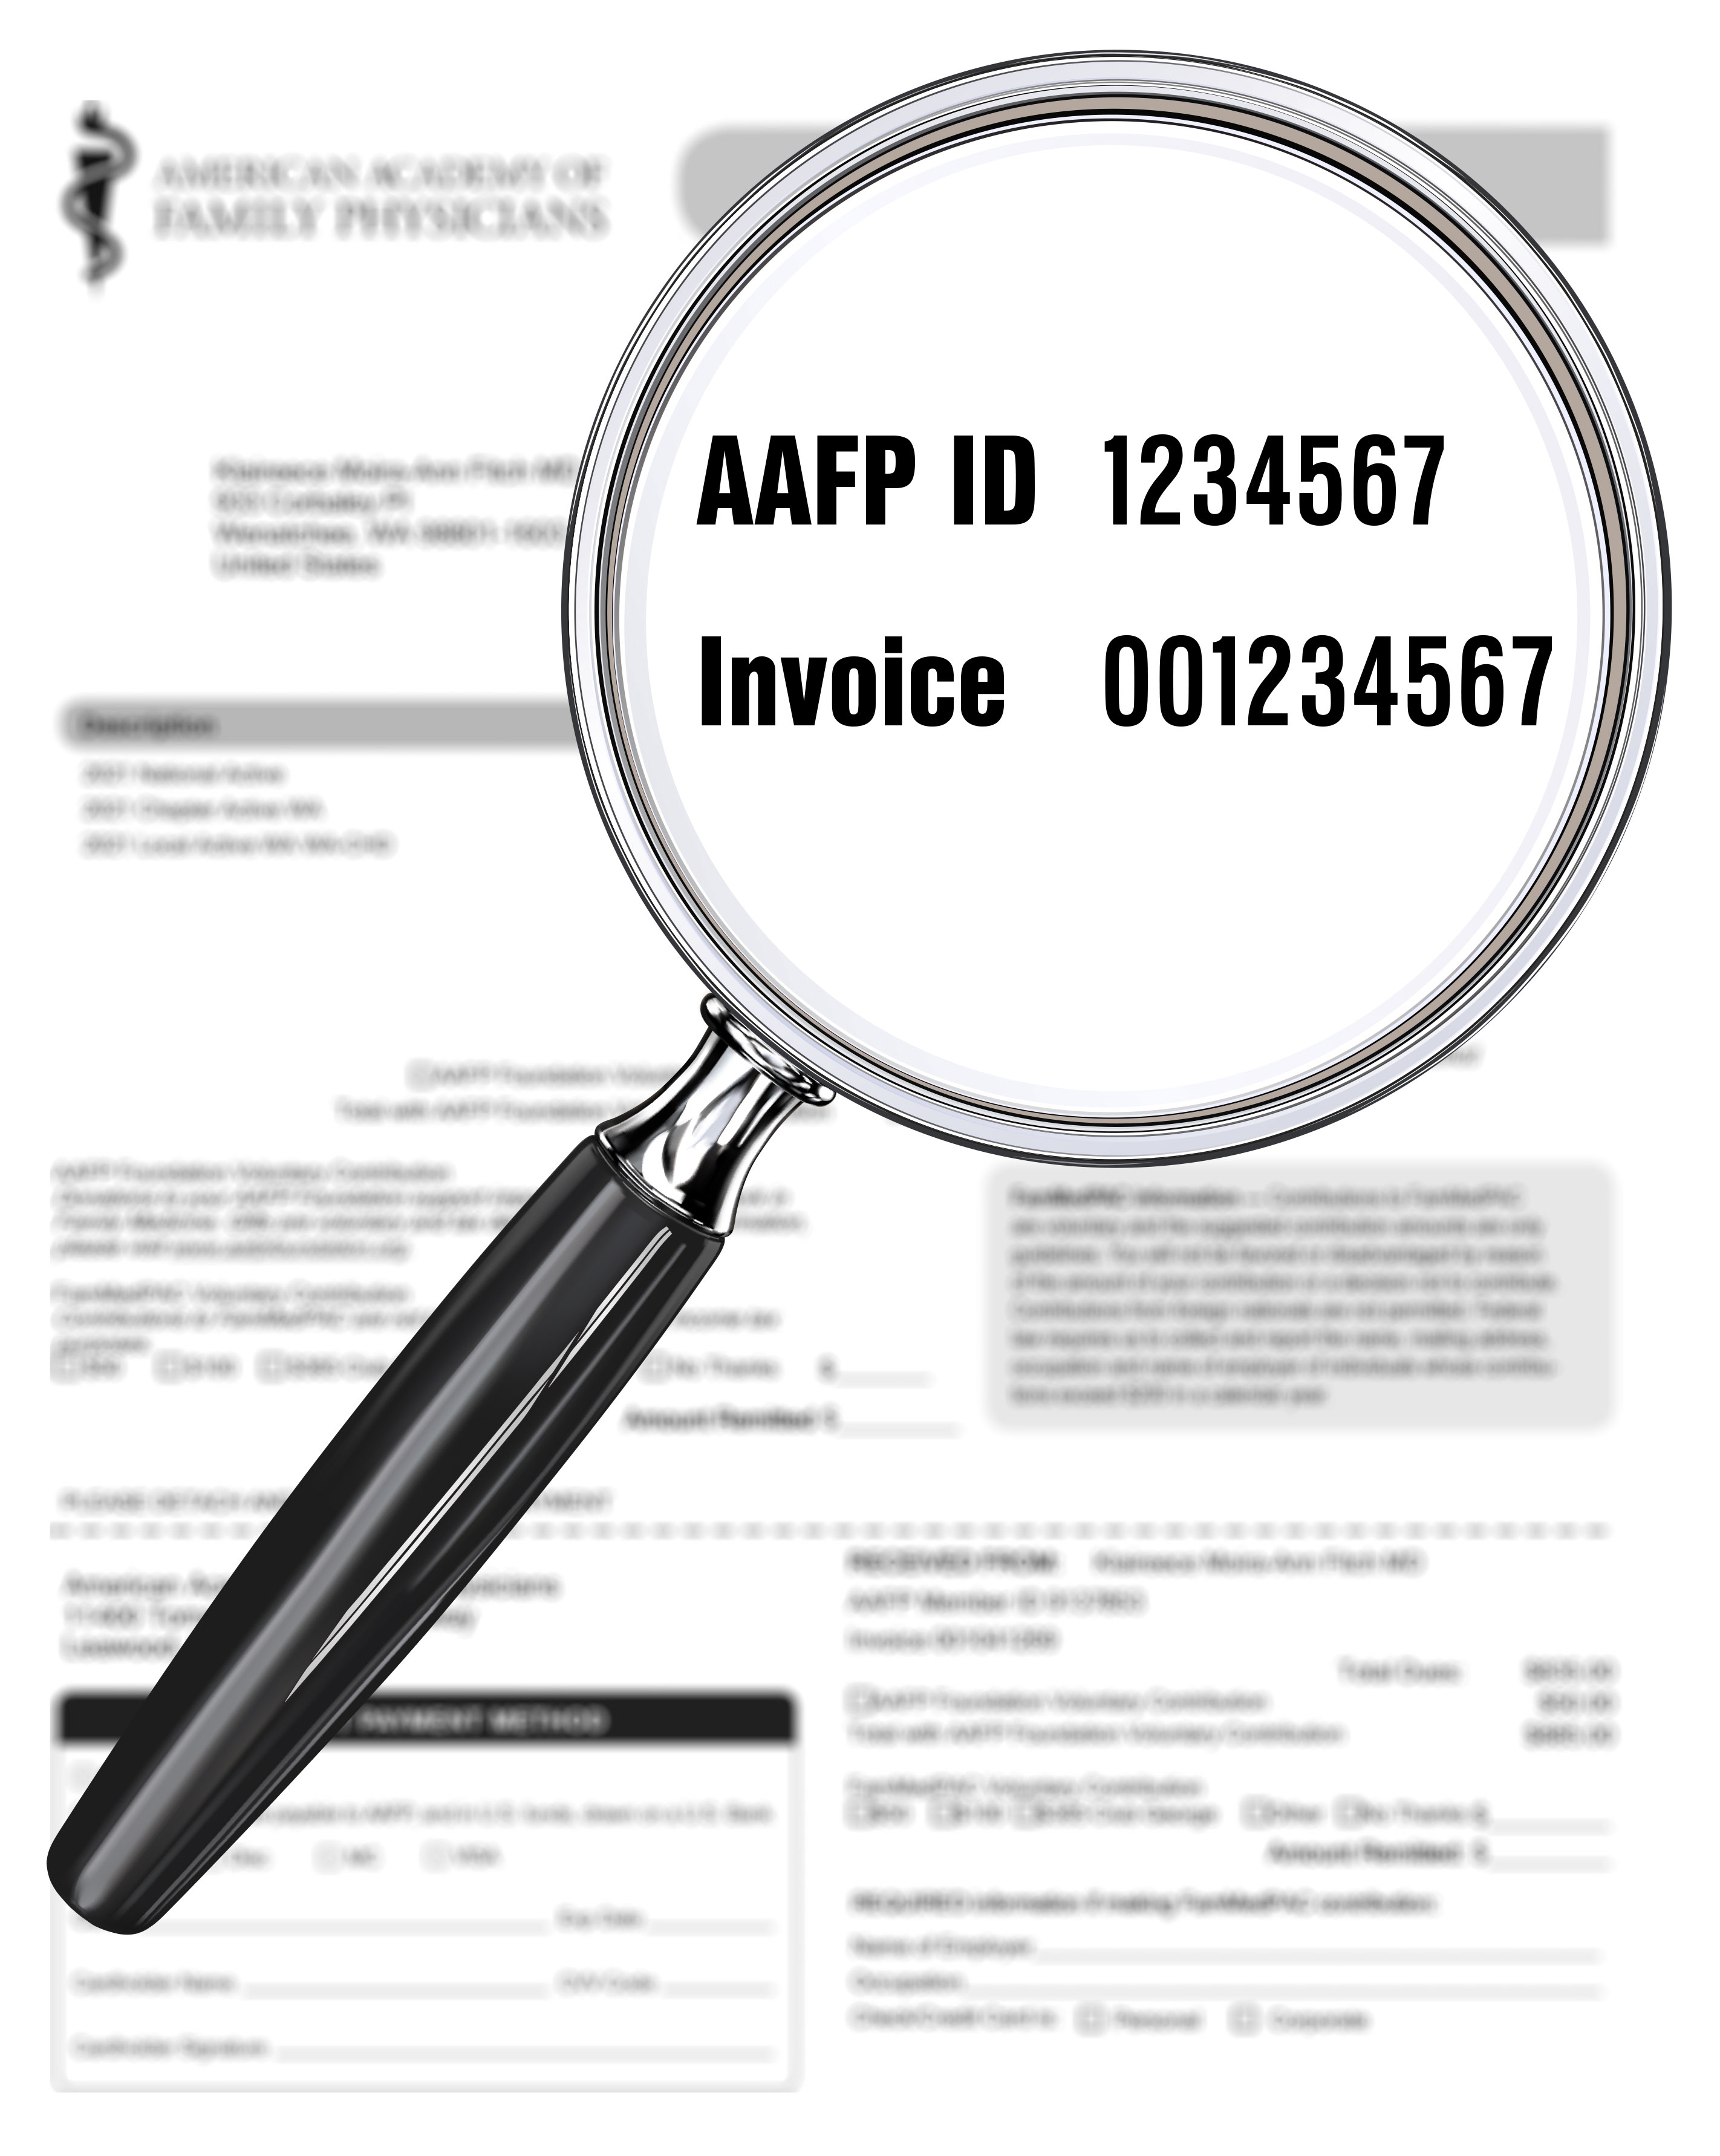 Invoice with highlighted member ID and invoice #